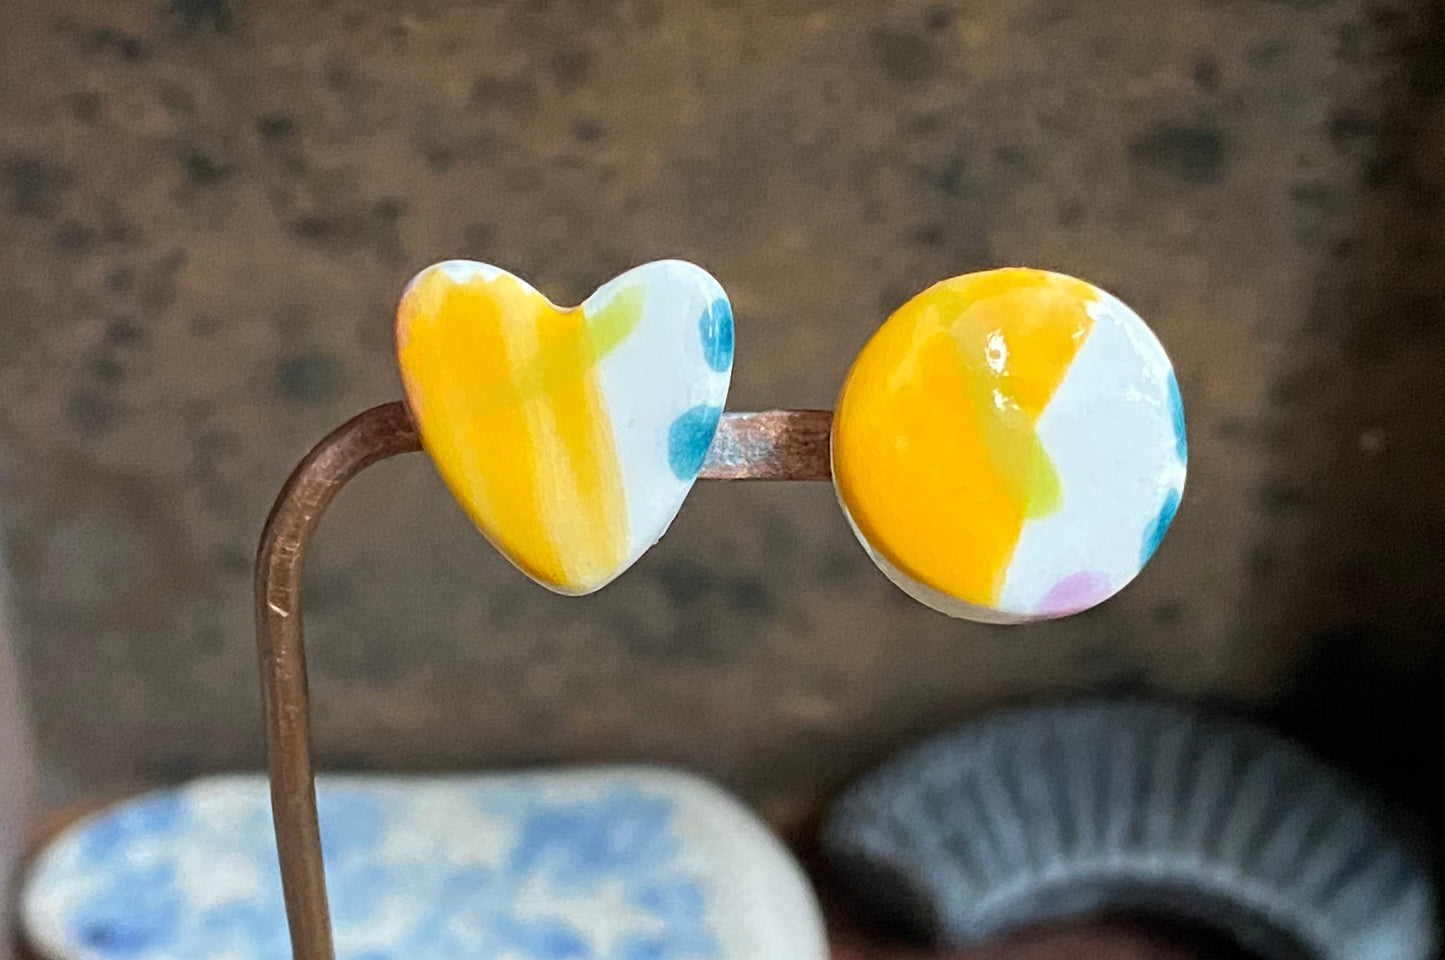 Ceramic Heart Mismatched Stud Earrings - Painterly Glaze, Sterling Silver Fixings & Vibrant Tones